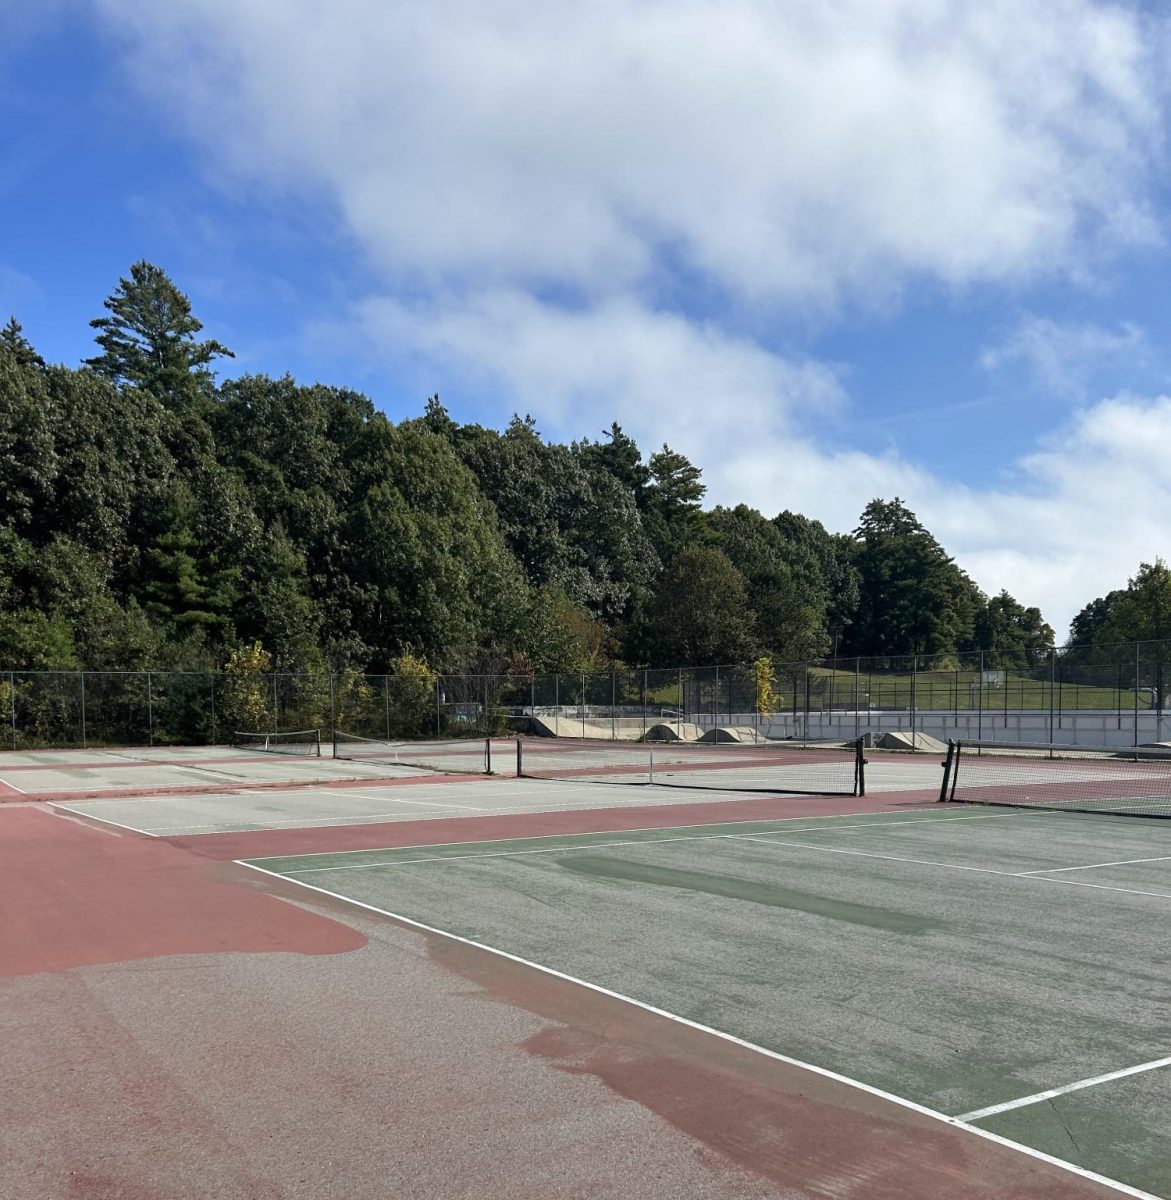 SHS tennis courts are used by students and staff who enjoy playing pickleball